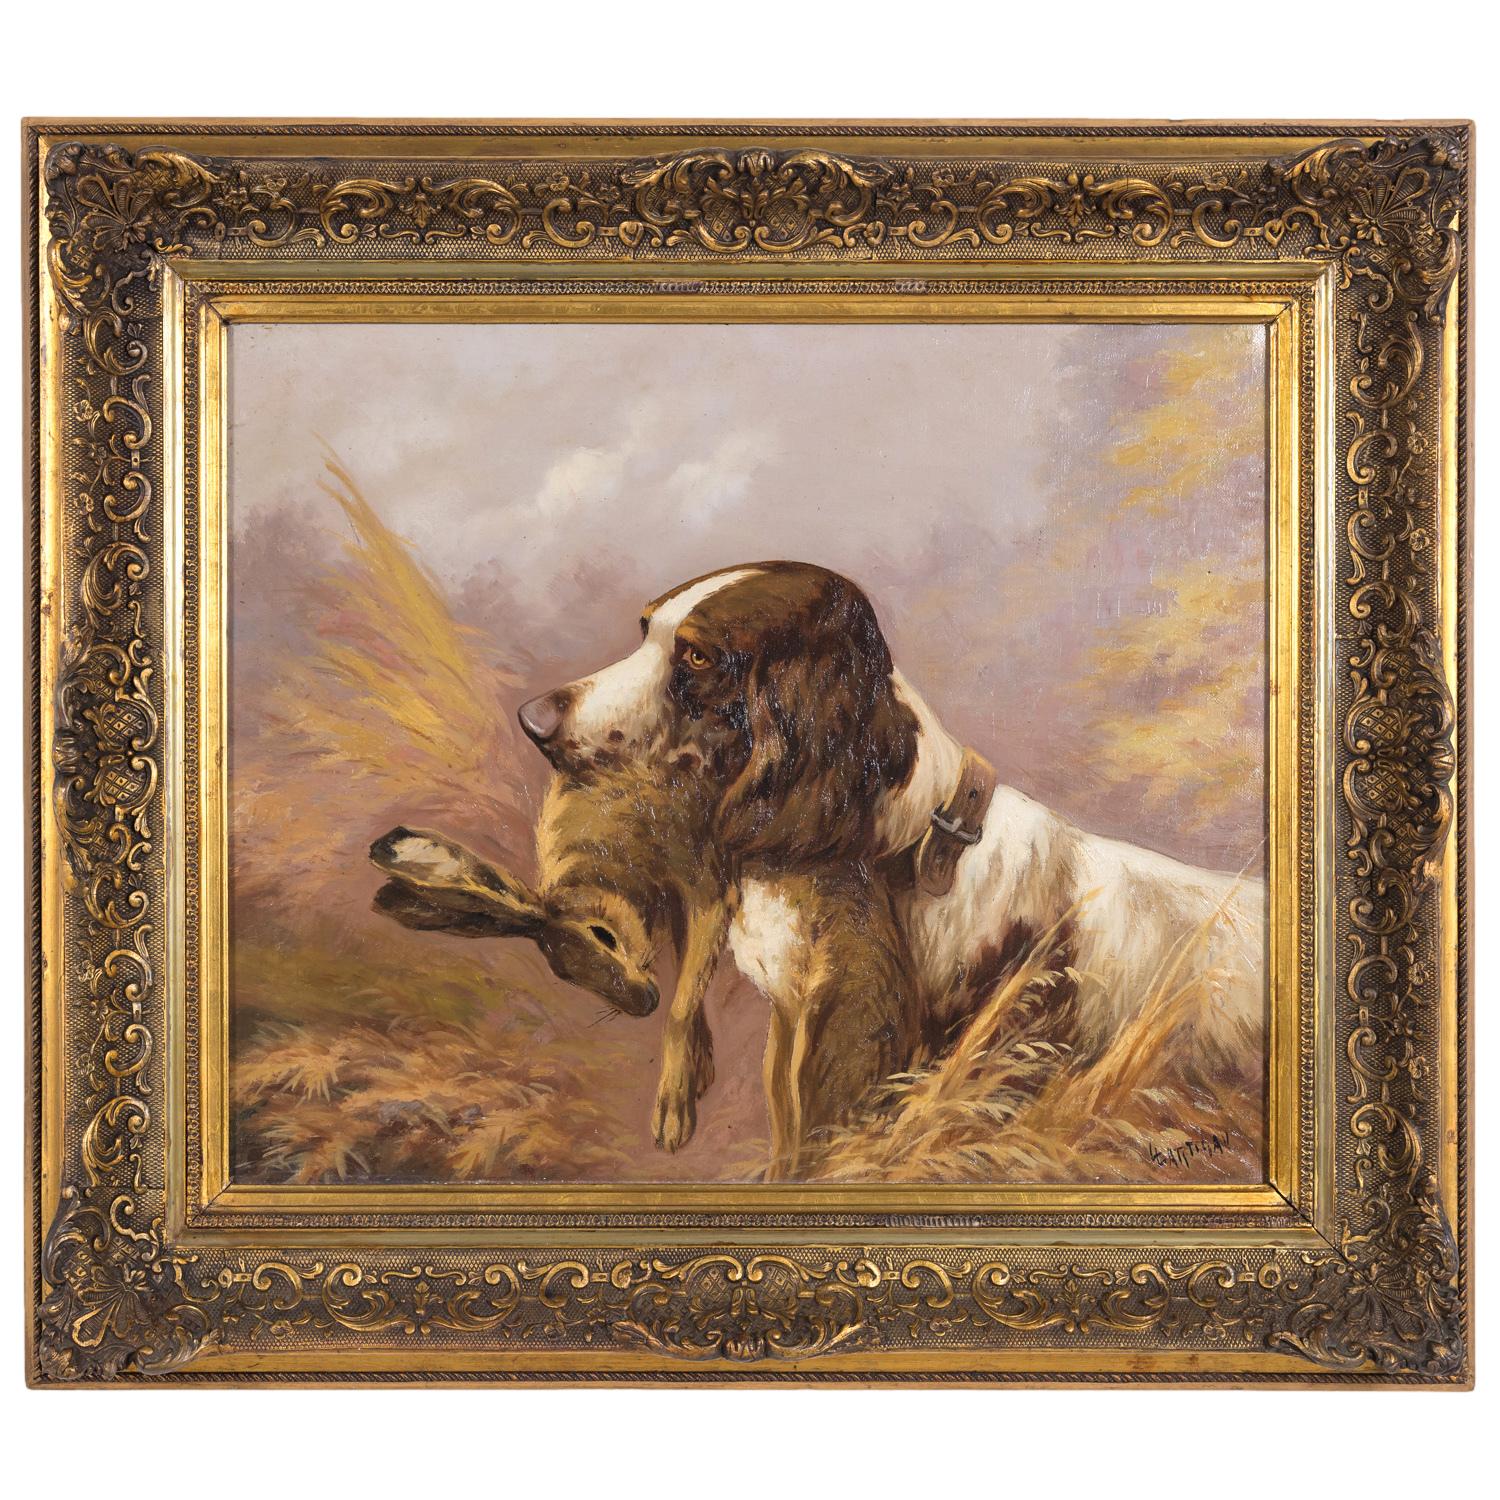 A stunning pair of 19th century original oil on canvas paintings by French artist Louis Lartigau, depicting Brittany Spaniels in the field with their trophies in mouth, one having retrieved a colorful pheasant and the other a large wild hare.